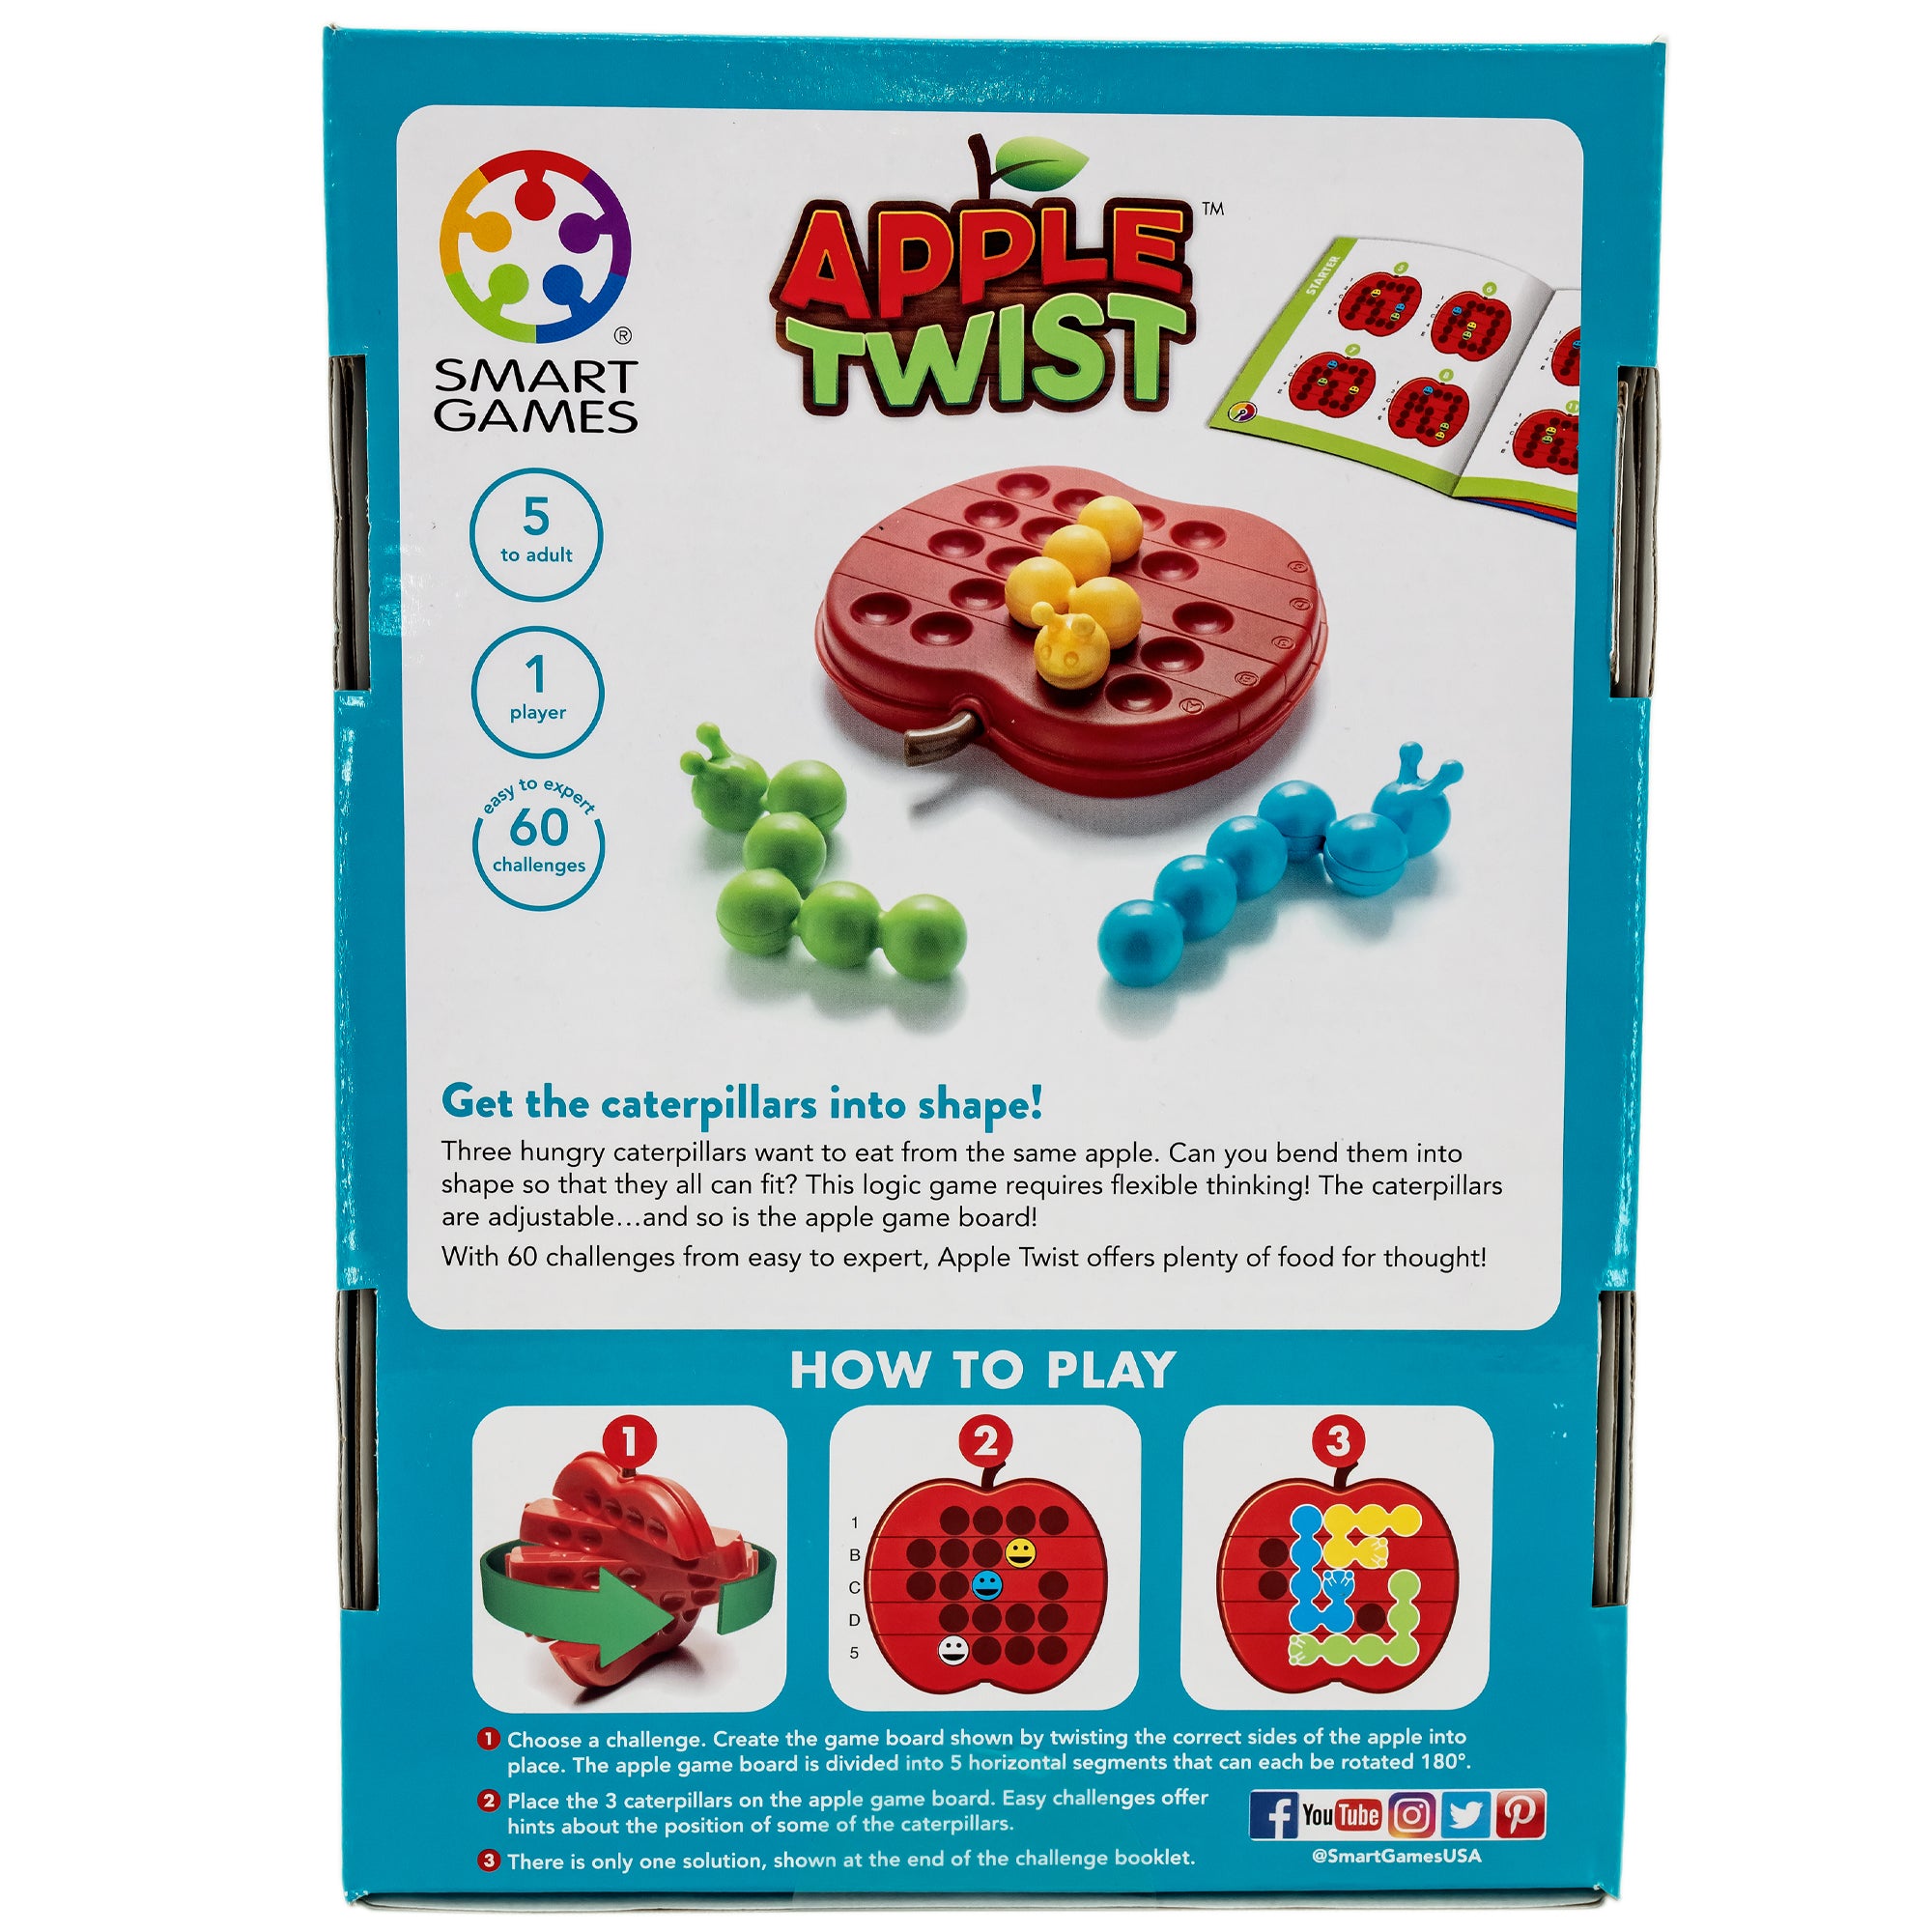 The Apple Twist Smart Game box back.  The box shows the apple game with the yellow caterpillar piece in place on the board and the blue and green off to the side, waiting to be put in place. Below are 3 pictures, showing how to play the game. The box indicates that the game is 1-player and is recommended for age 5 or older. There are 60 challenges.